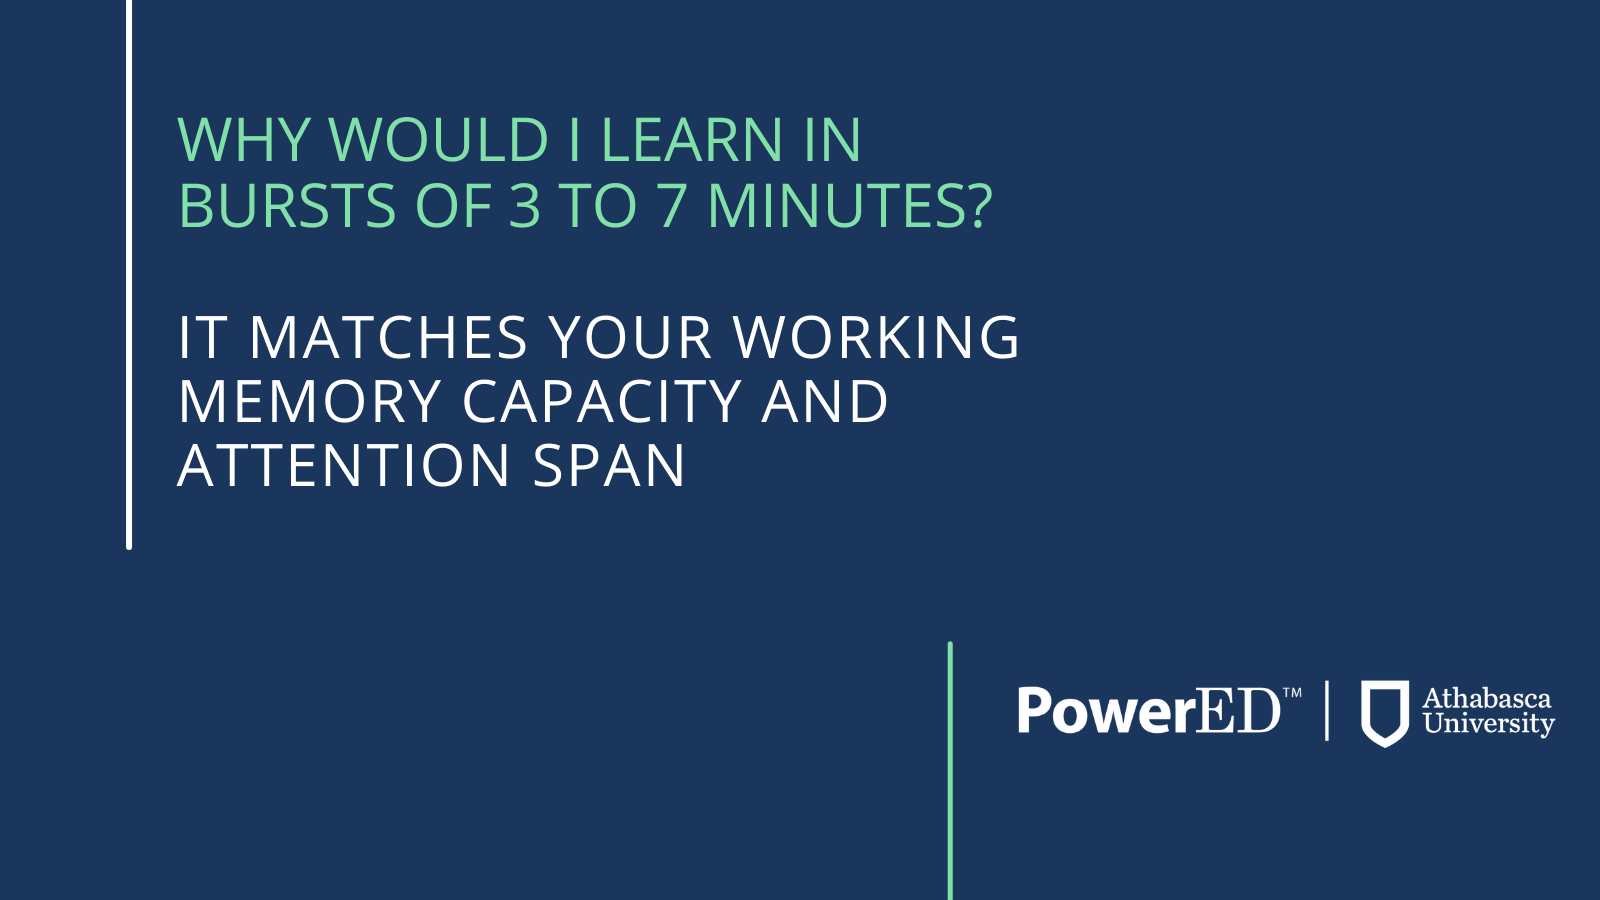 learn in spurts of 3-7 minutes to match your working and memory capacity